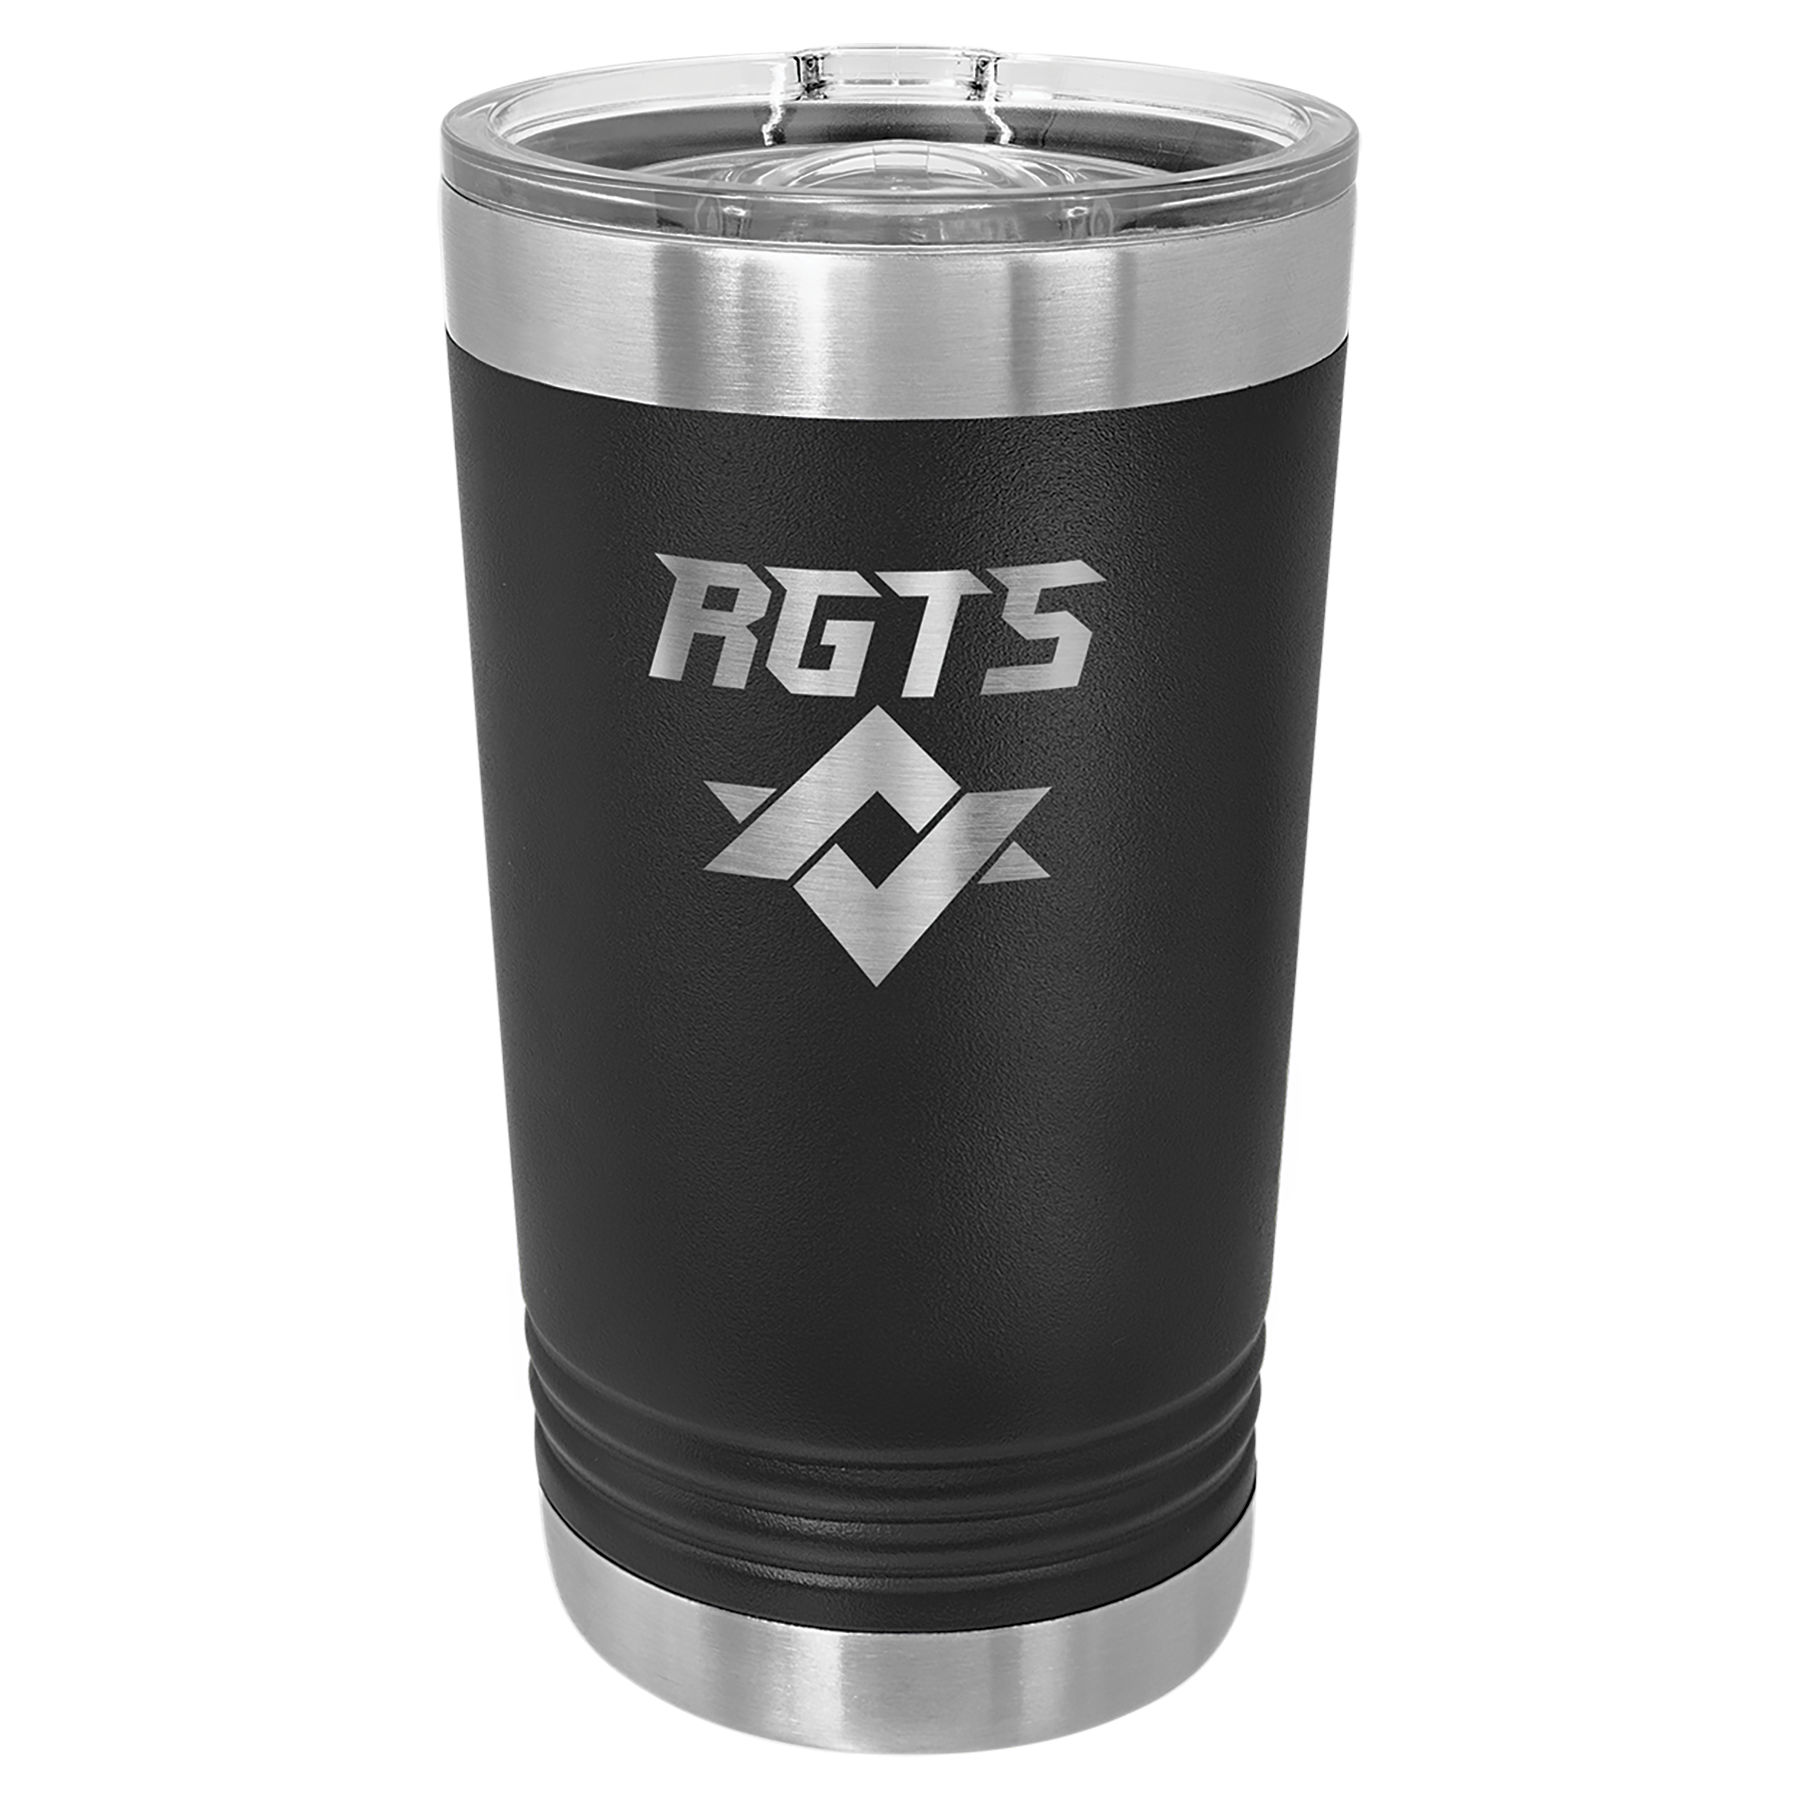 16 oz. Black Stainless Steel Polar Camel Pint with Slider Lid.  Customizable with your personal image or saying.